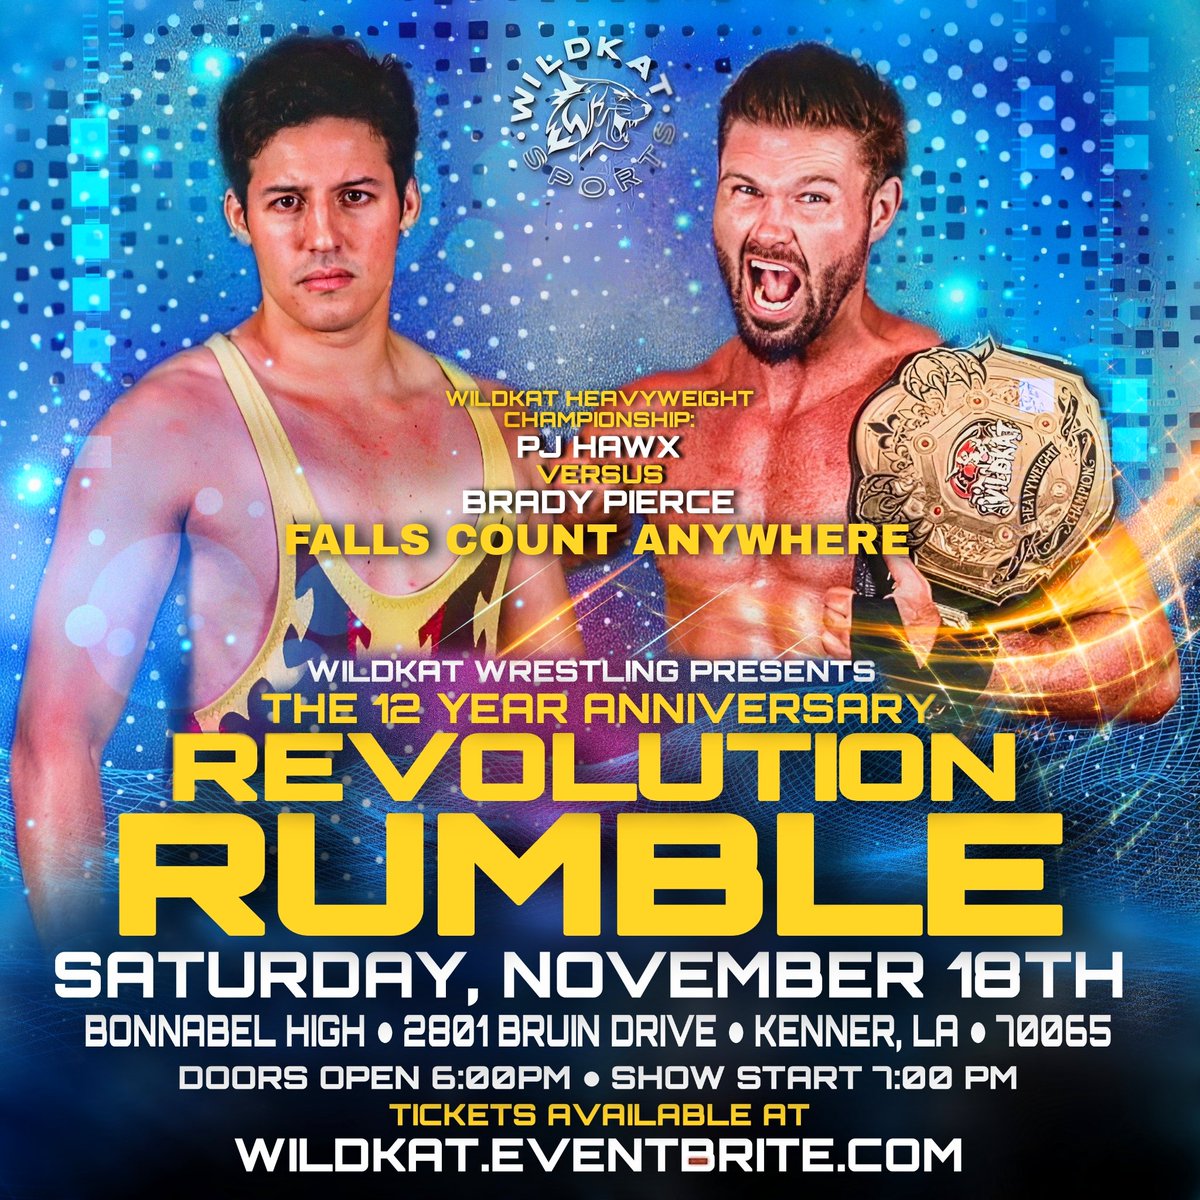 FALLS COUNT ANYWHERE The rematch is set! After the controversial conclusion of their last match, @BradyPierce1 WILL defend the Wildkat Heavyweight Title against @pj_hawx at the @WildKatSports #RevolutionRumble in a FALLS COUNT ANYWHERE MATCH! Tix at wildkat.eventbrite.com